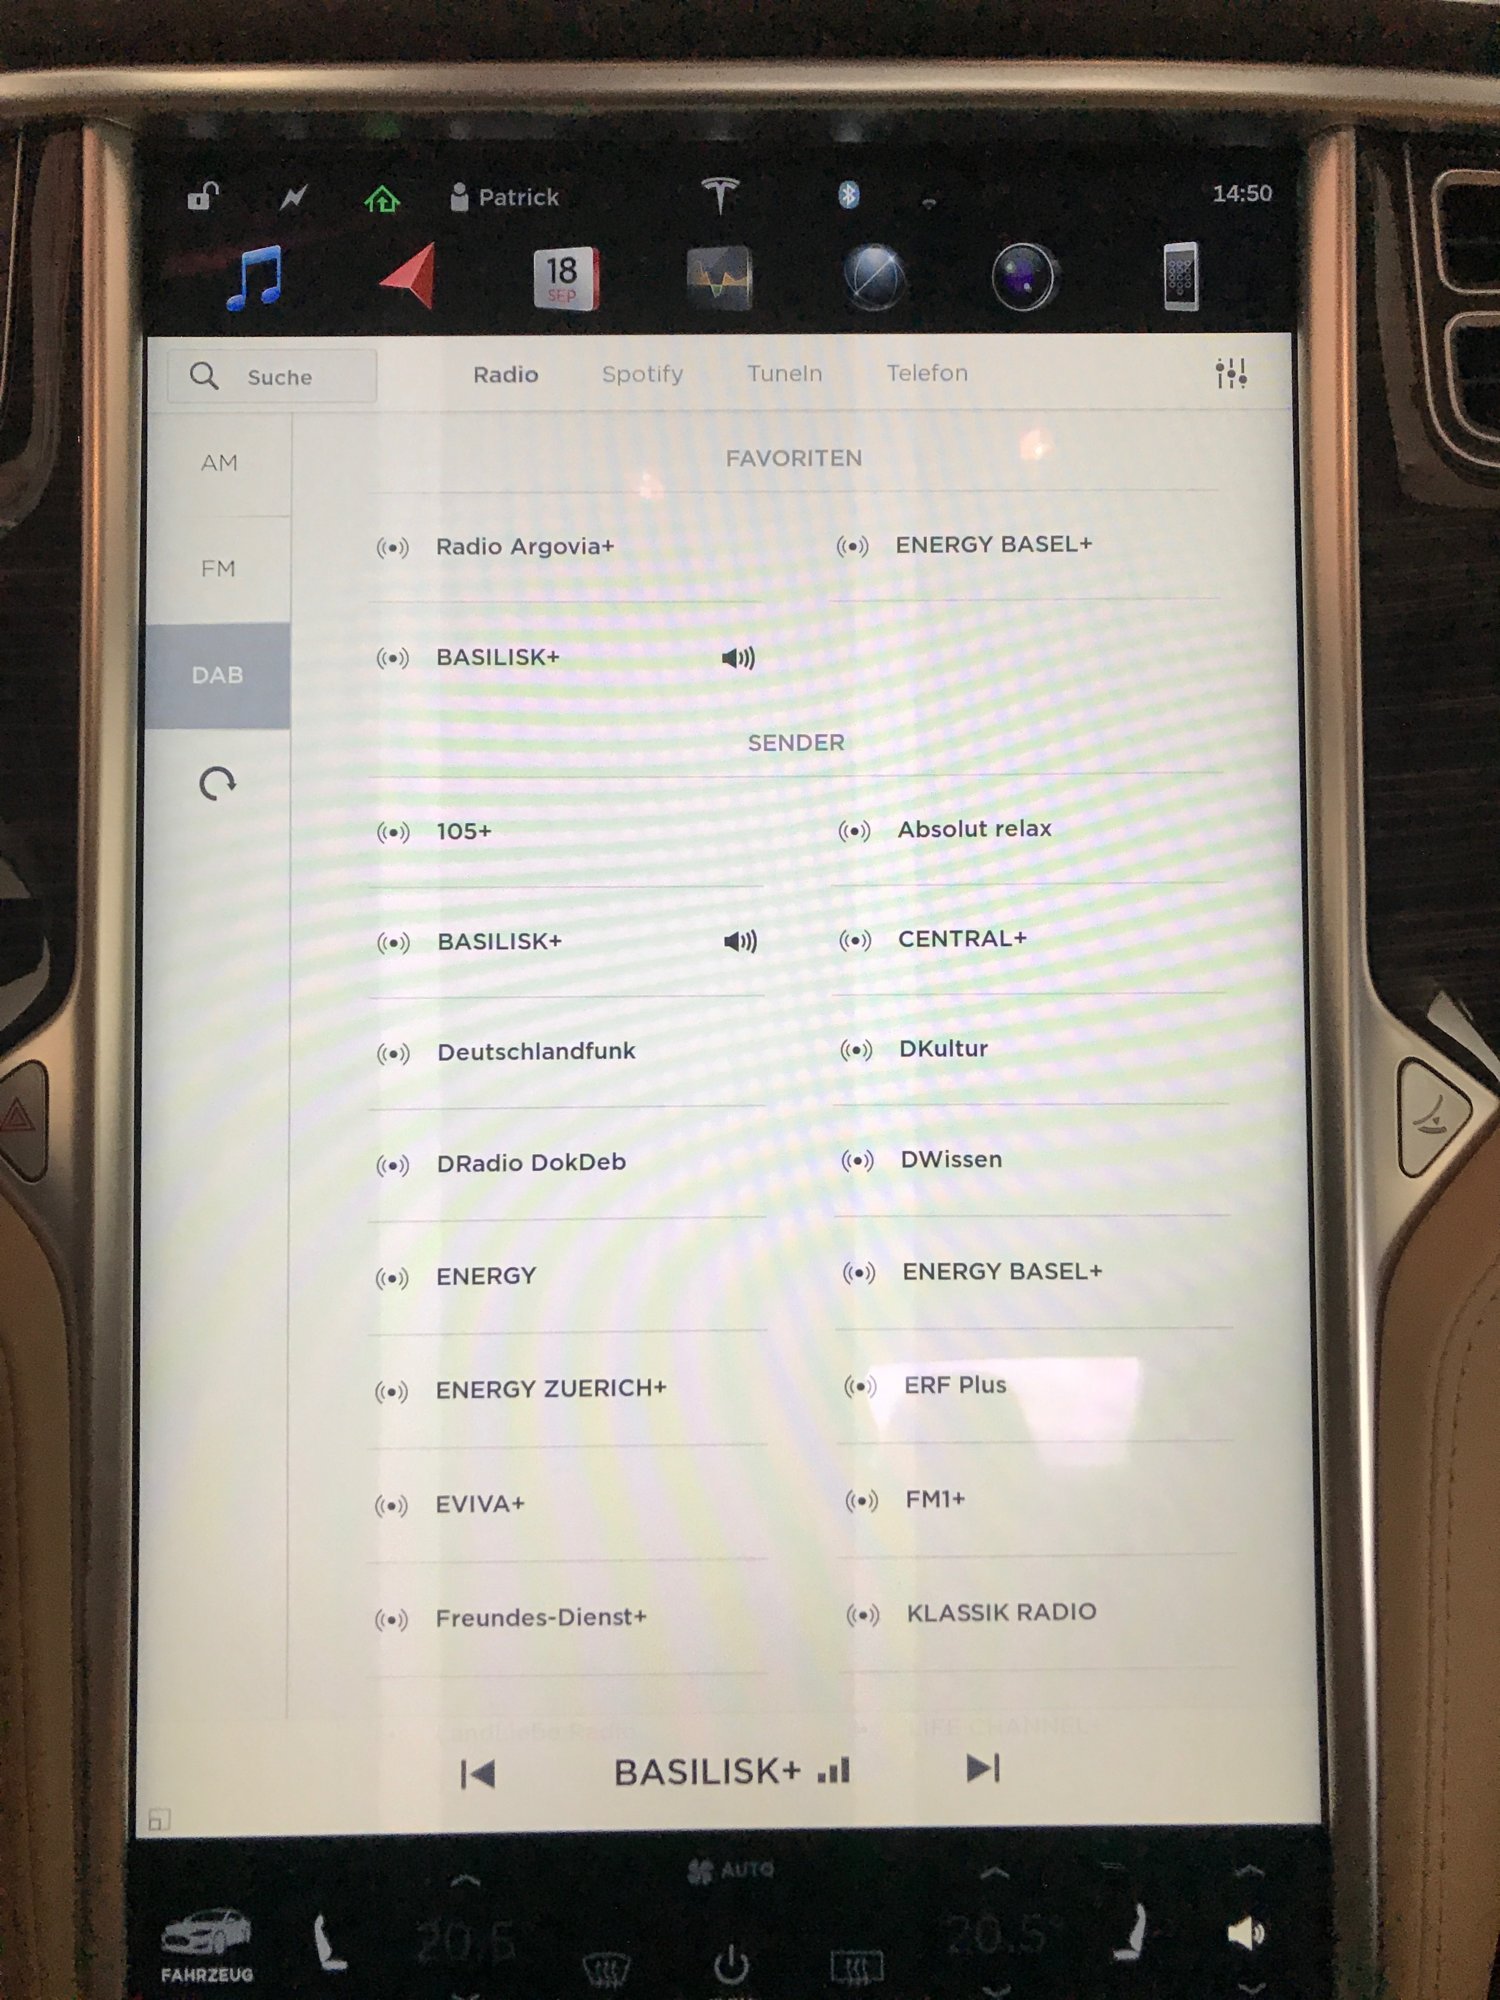 How terrible is your DAB reception? | Tesla Motors Club